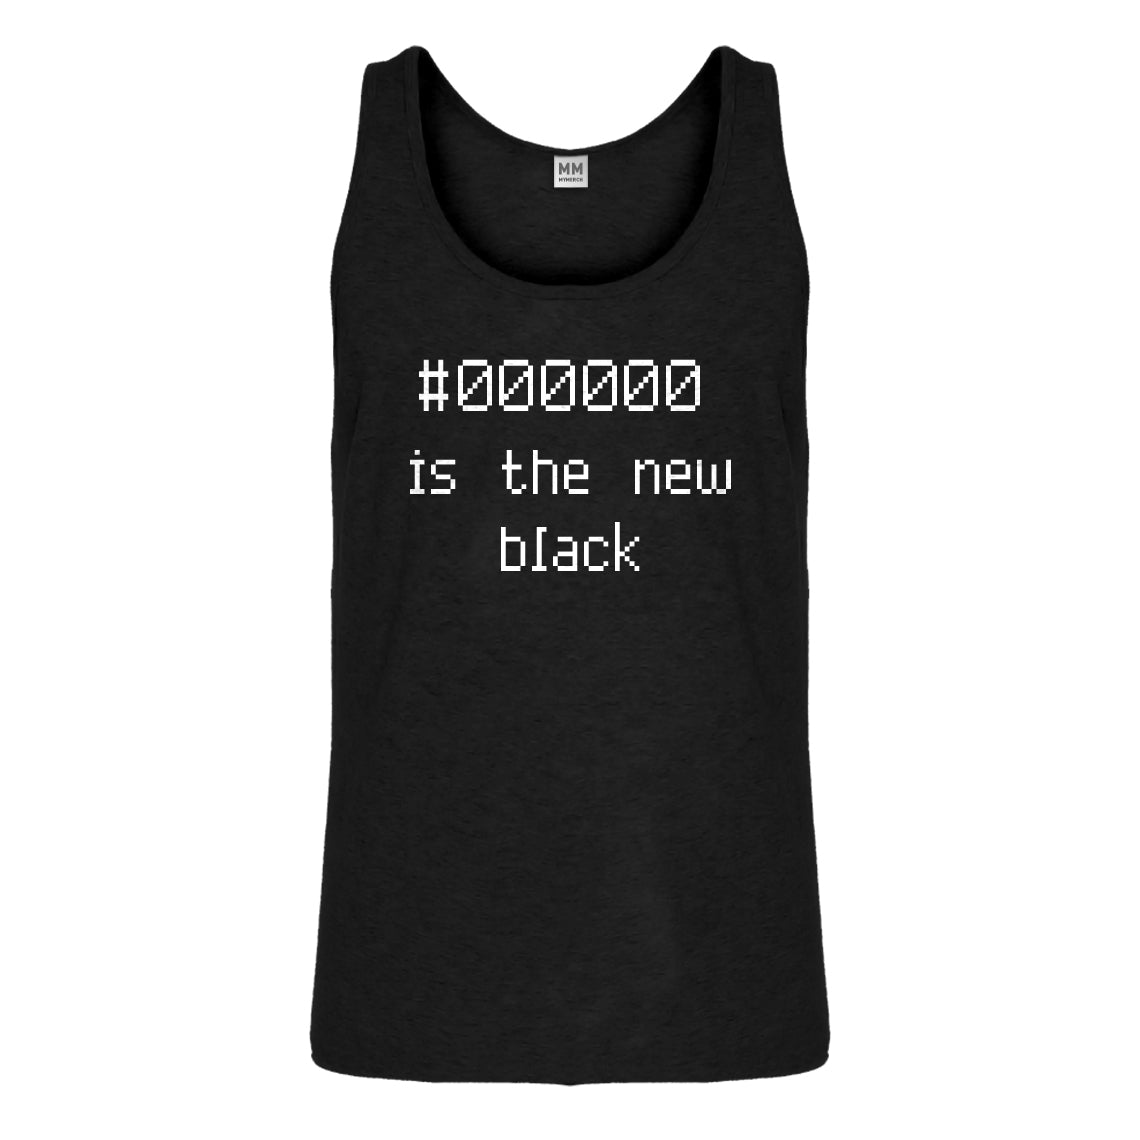 Tank 000000 is the new black Mens Jersey Tank Top